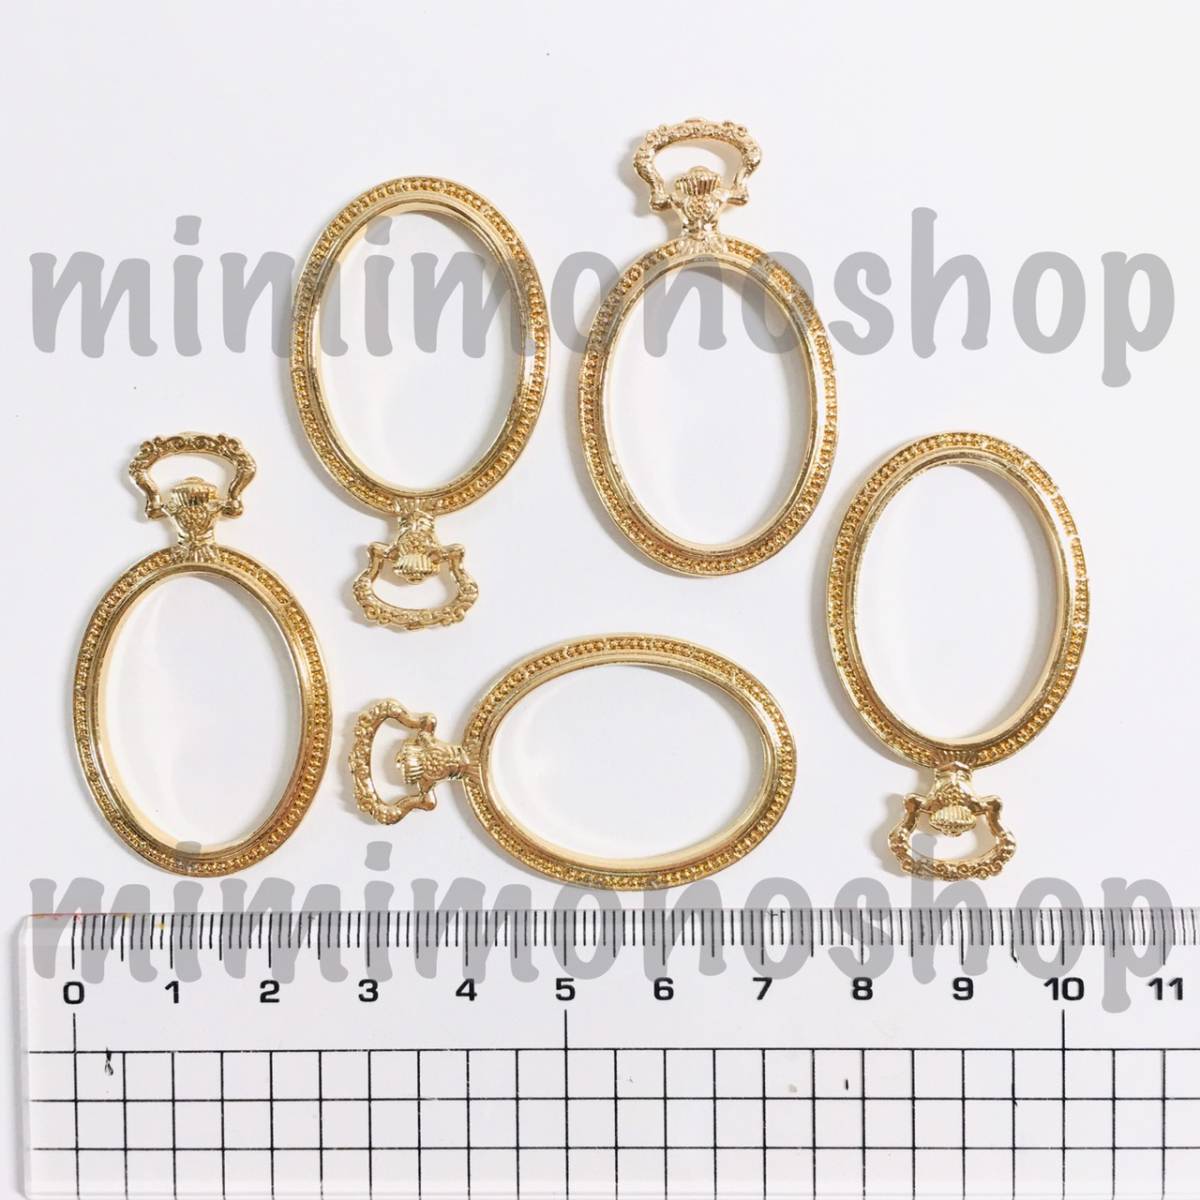 h114★New★Buy it now★Charm [Resin empty frame/opal shaped pocket watch small 5 pieces/gold] Handmade accessories Metal parts Materials Materials Materials, hand craft, handicraft, beadwork, metal parts